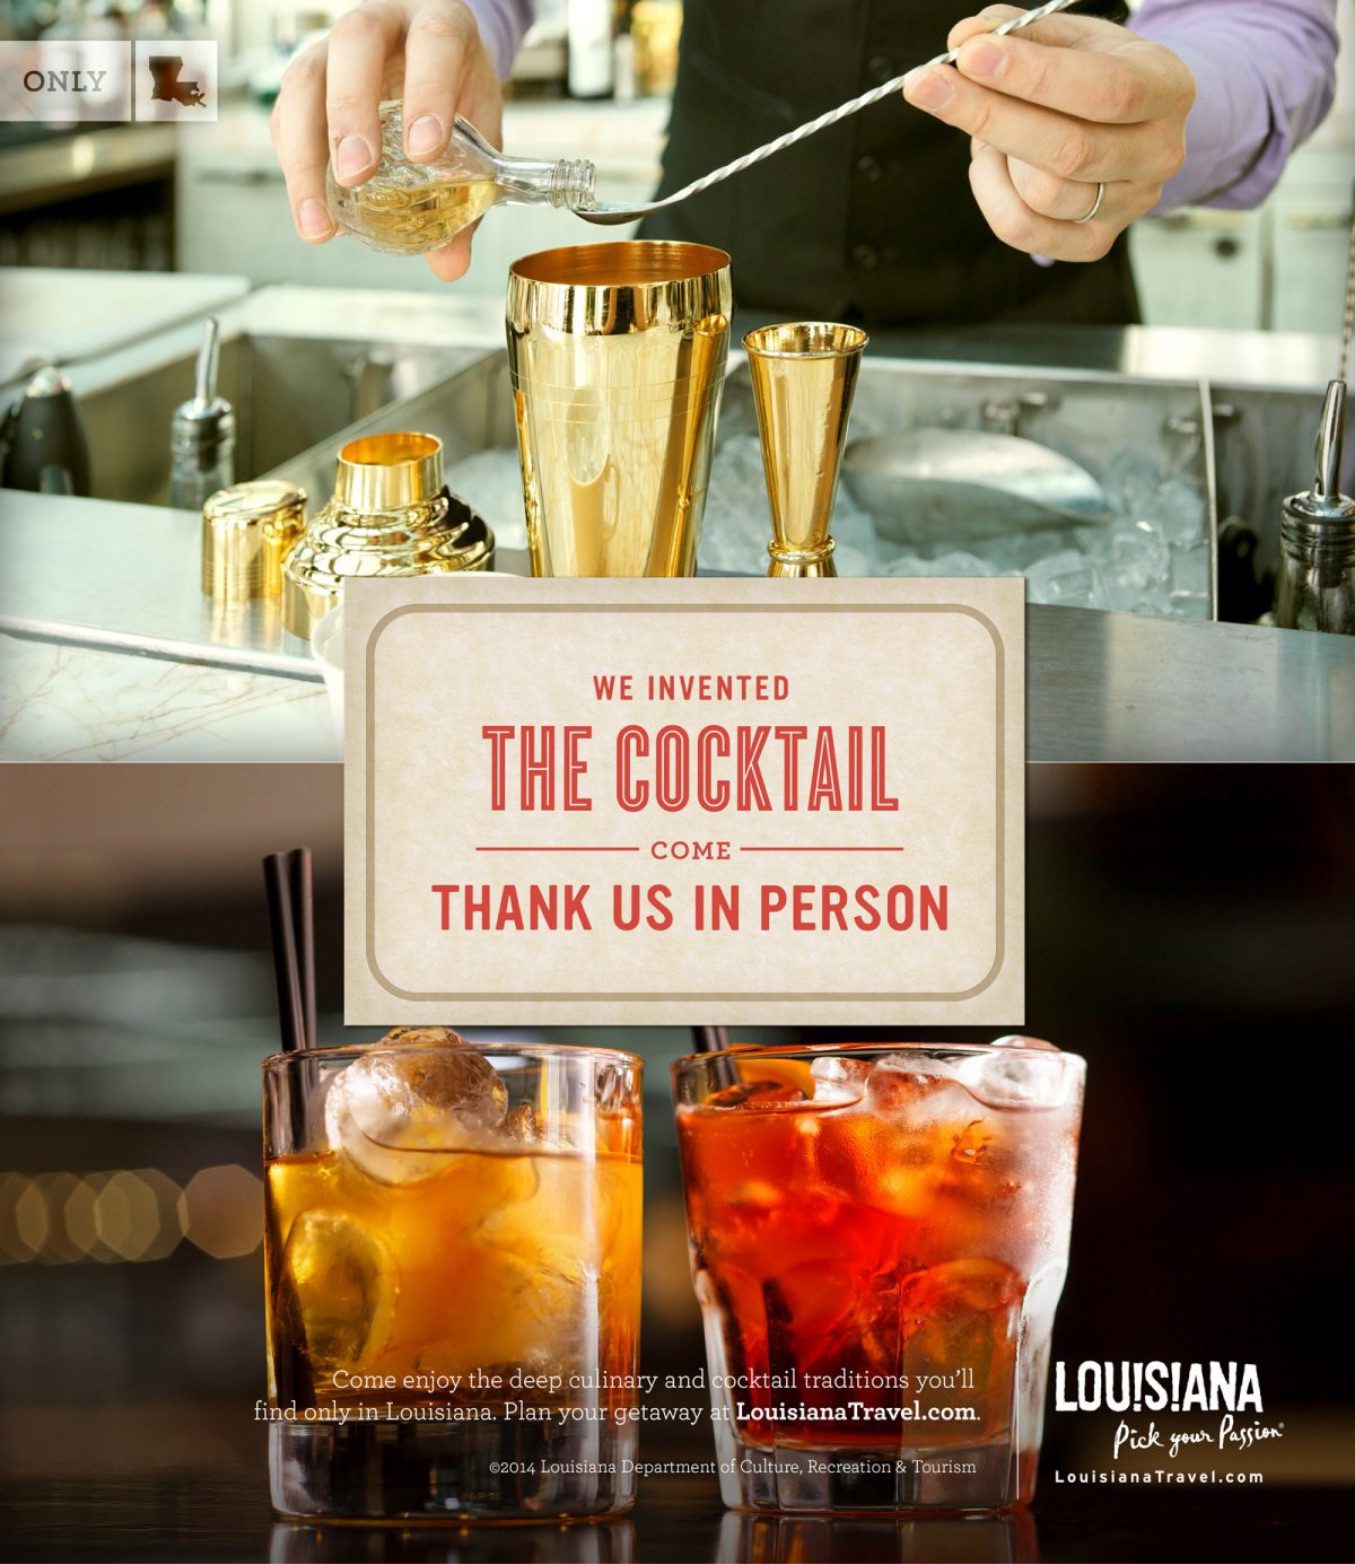 split image ad featuring two cocktails on the bottom and a bartender mixing a drink in the top